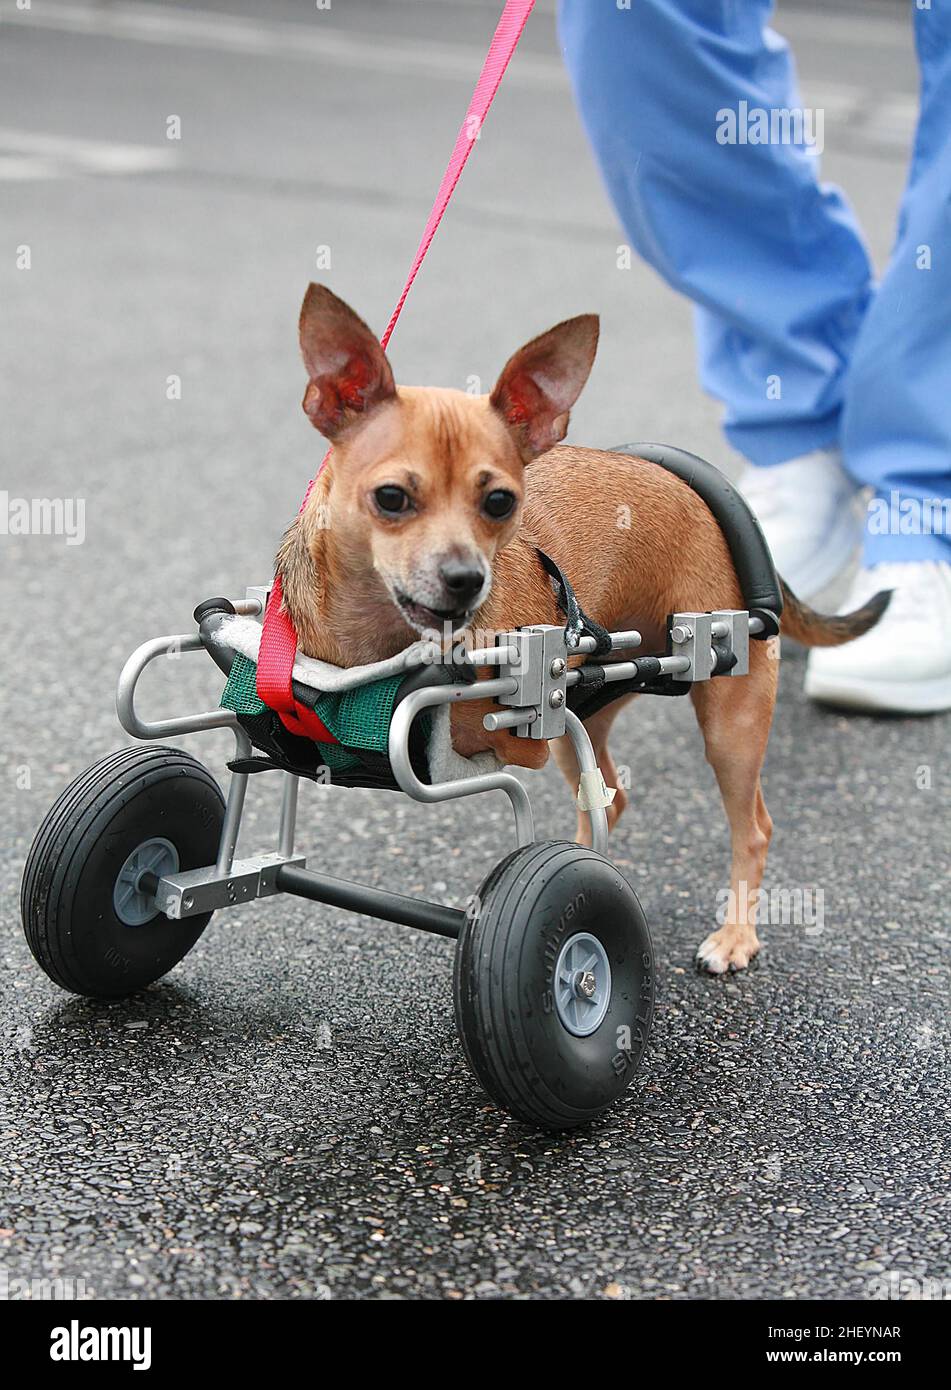 ONE OF THE WORLDS FIRST FOUR CHIHUAHUA PUPS WHO WERE BORN WITHOUT FRONT LEGS, ON SPECIALLY DESIGNED WHEELS.   .  THE WORLD'S FIRST FOUR CHIHUAHUA DOGS BORN WITHOUT FRONT LEGS HAVE LEARNT TO USE THEIR SPECIALLY ADAPTED WHEELS TO GET AROUND. NEW YORK, USA.  PICTURE: GARY ROBERTS Stock Photo